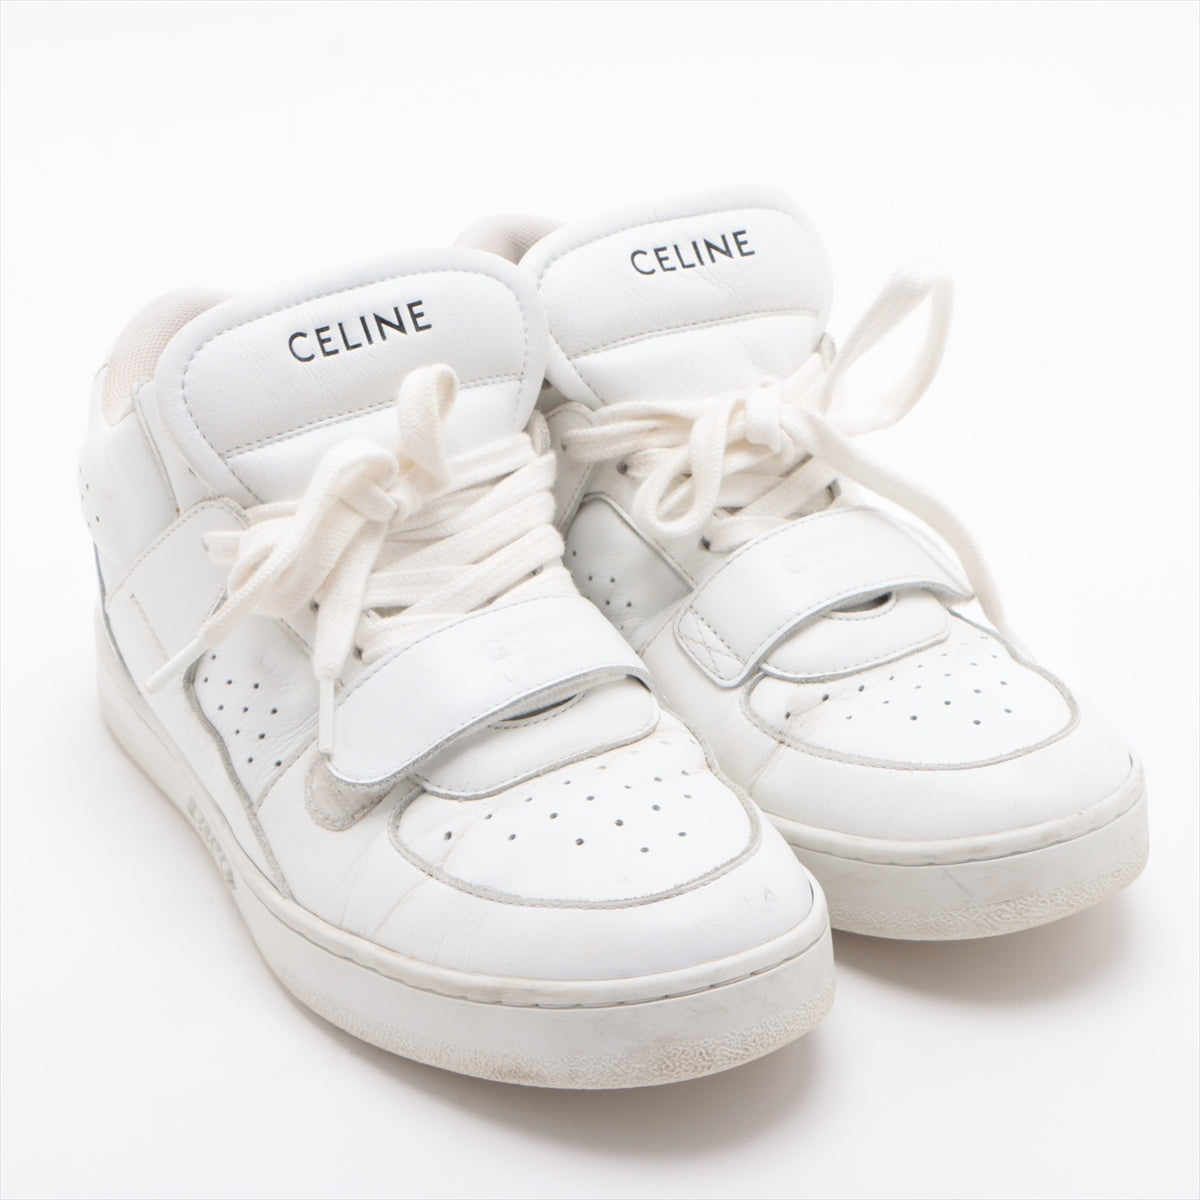 CELINE Leather High-top Sneakers 36 Ladies' White CT-02 RM0241 Is there a replacement string